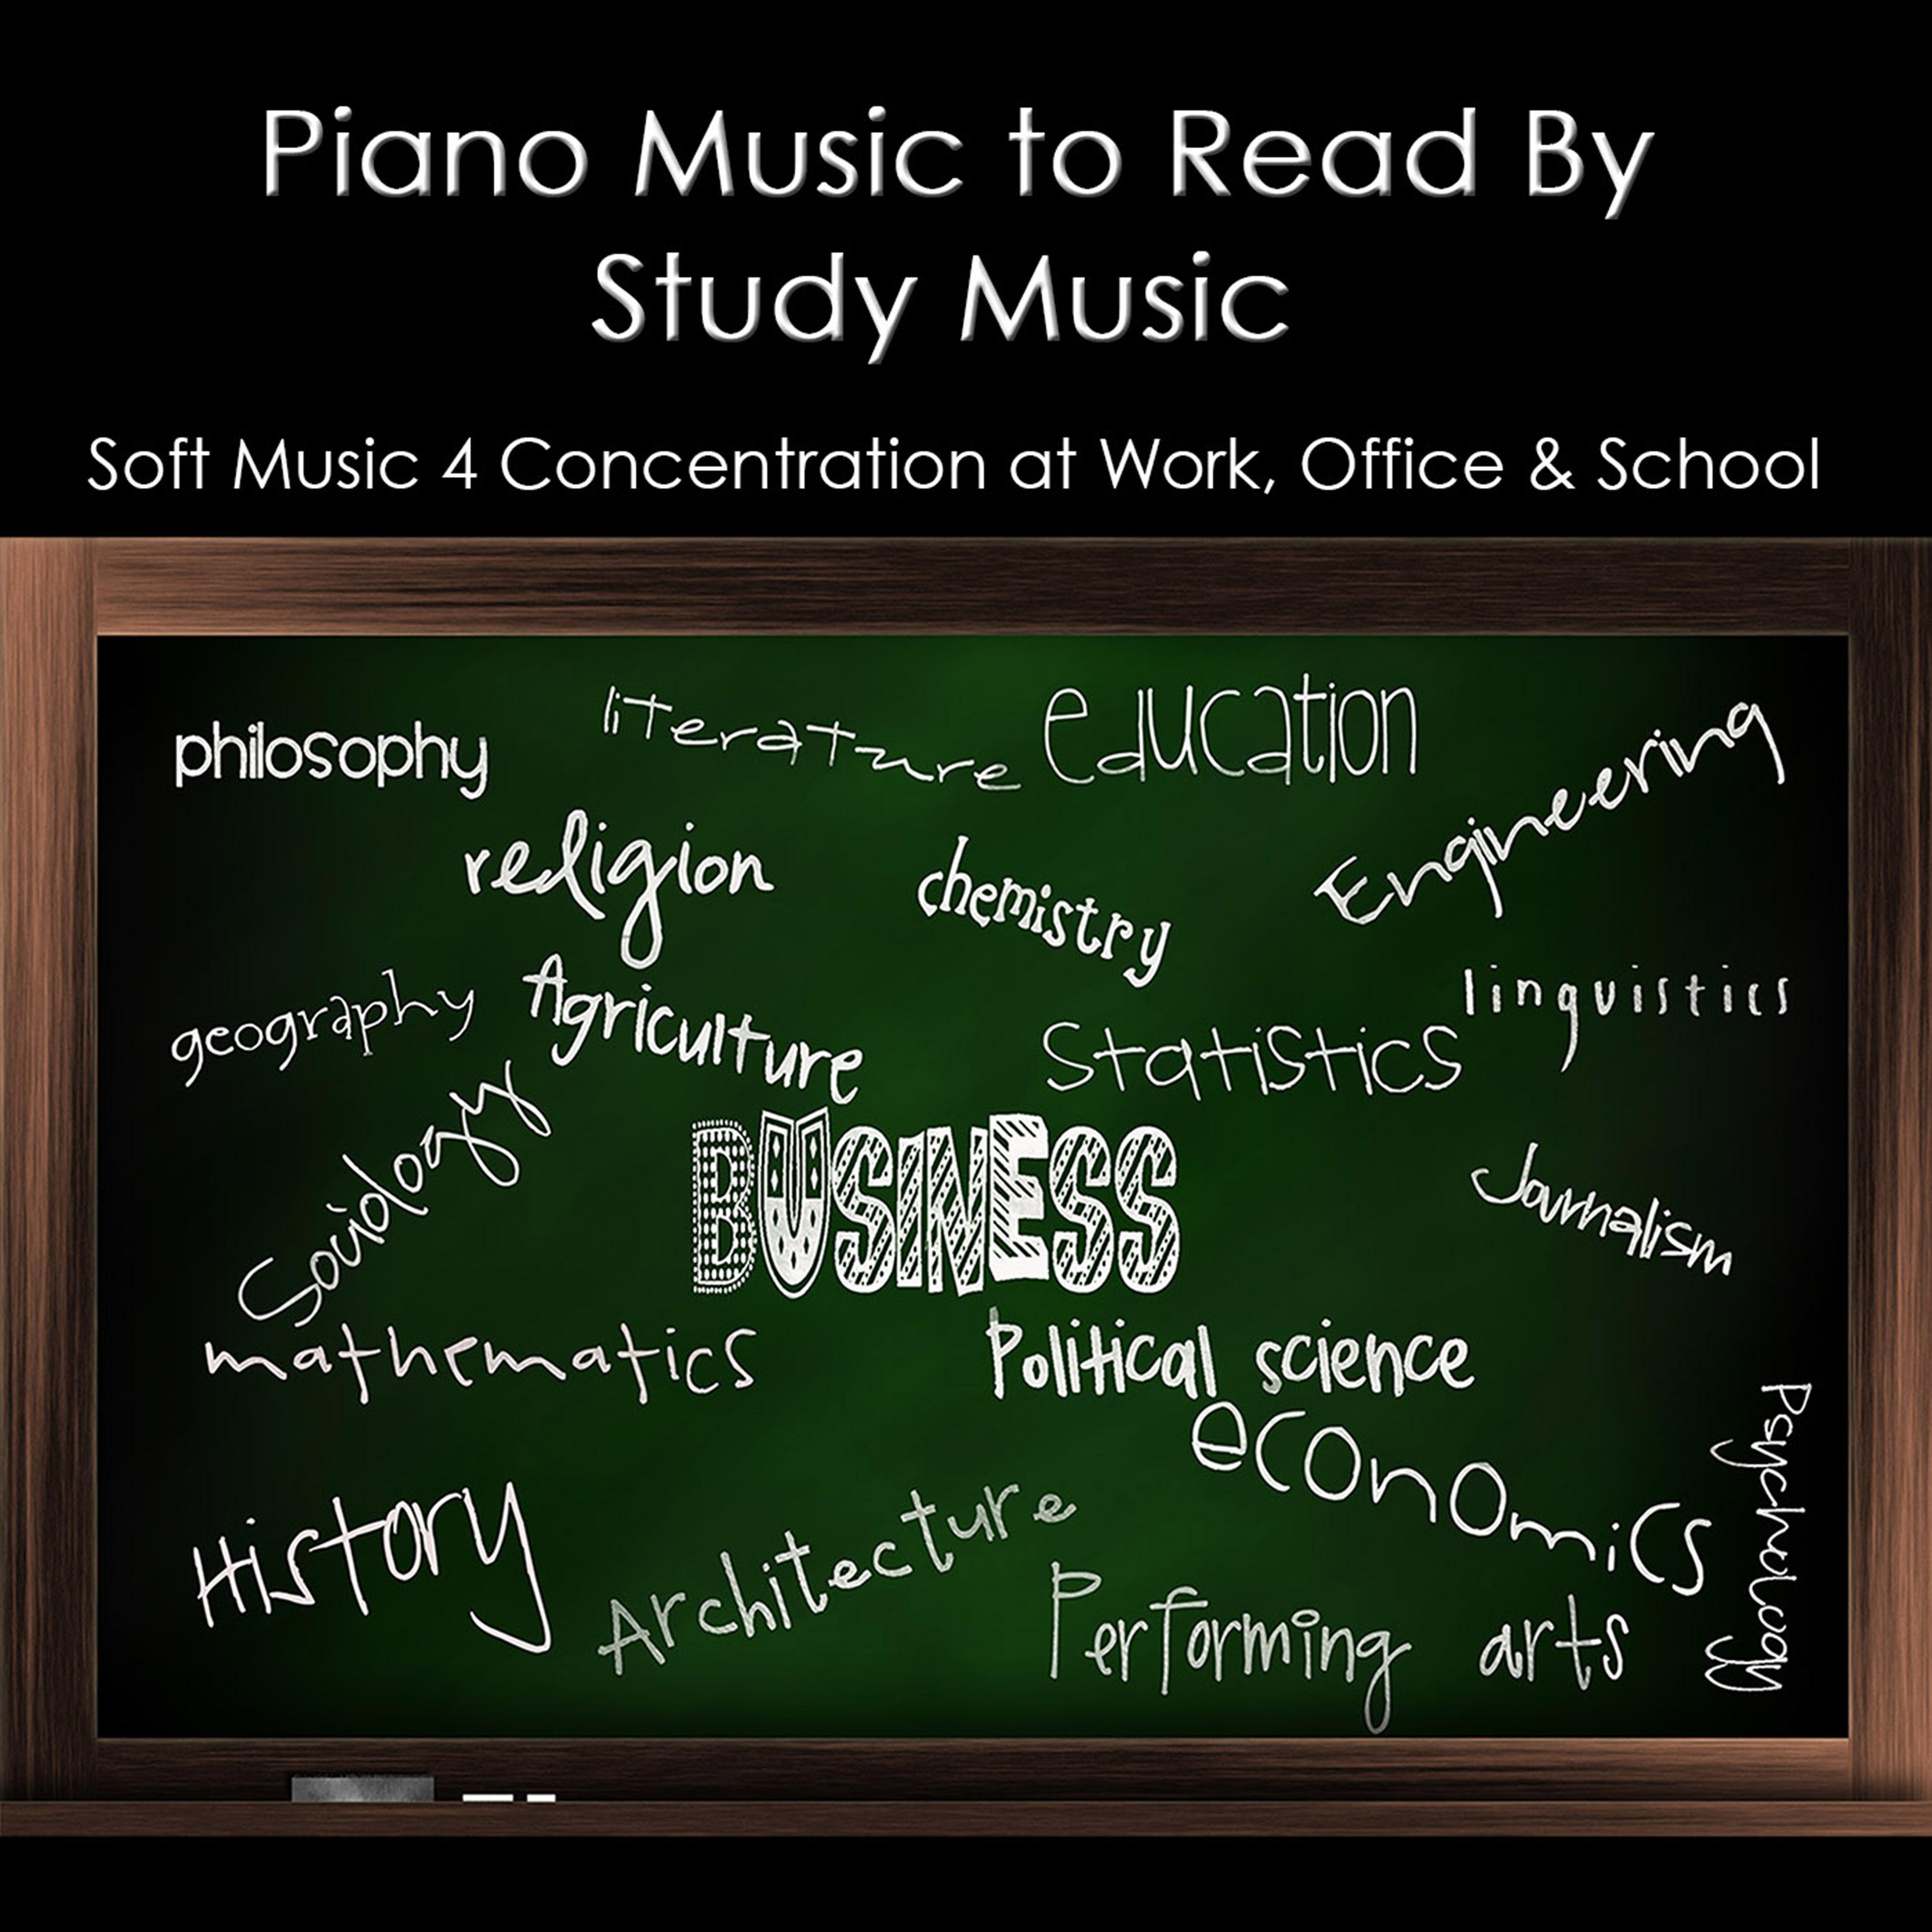 Piano Music to Read By, Study Music & Soft Music 4 Concentration At Work, Office & School